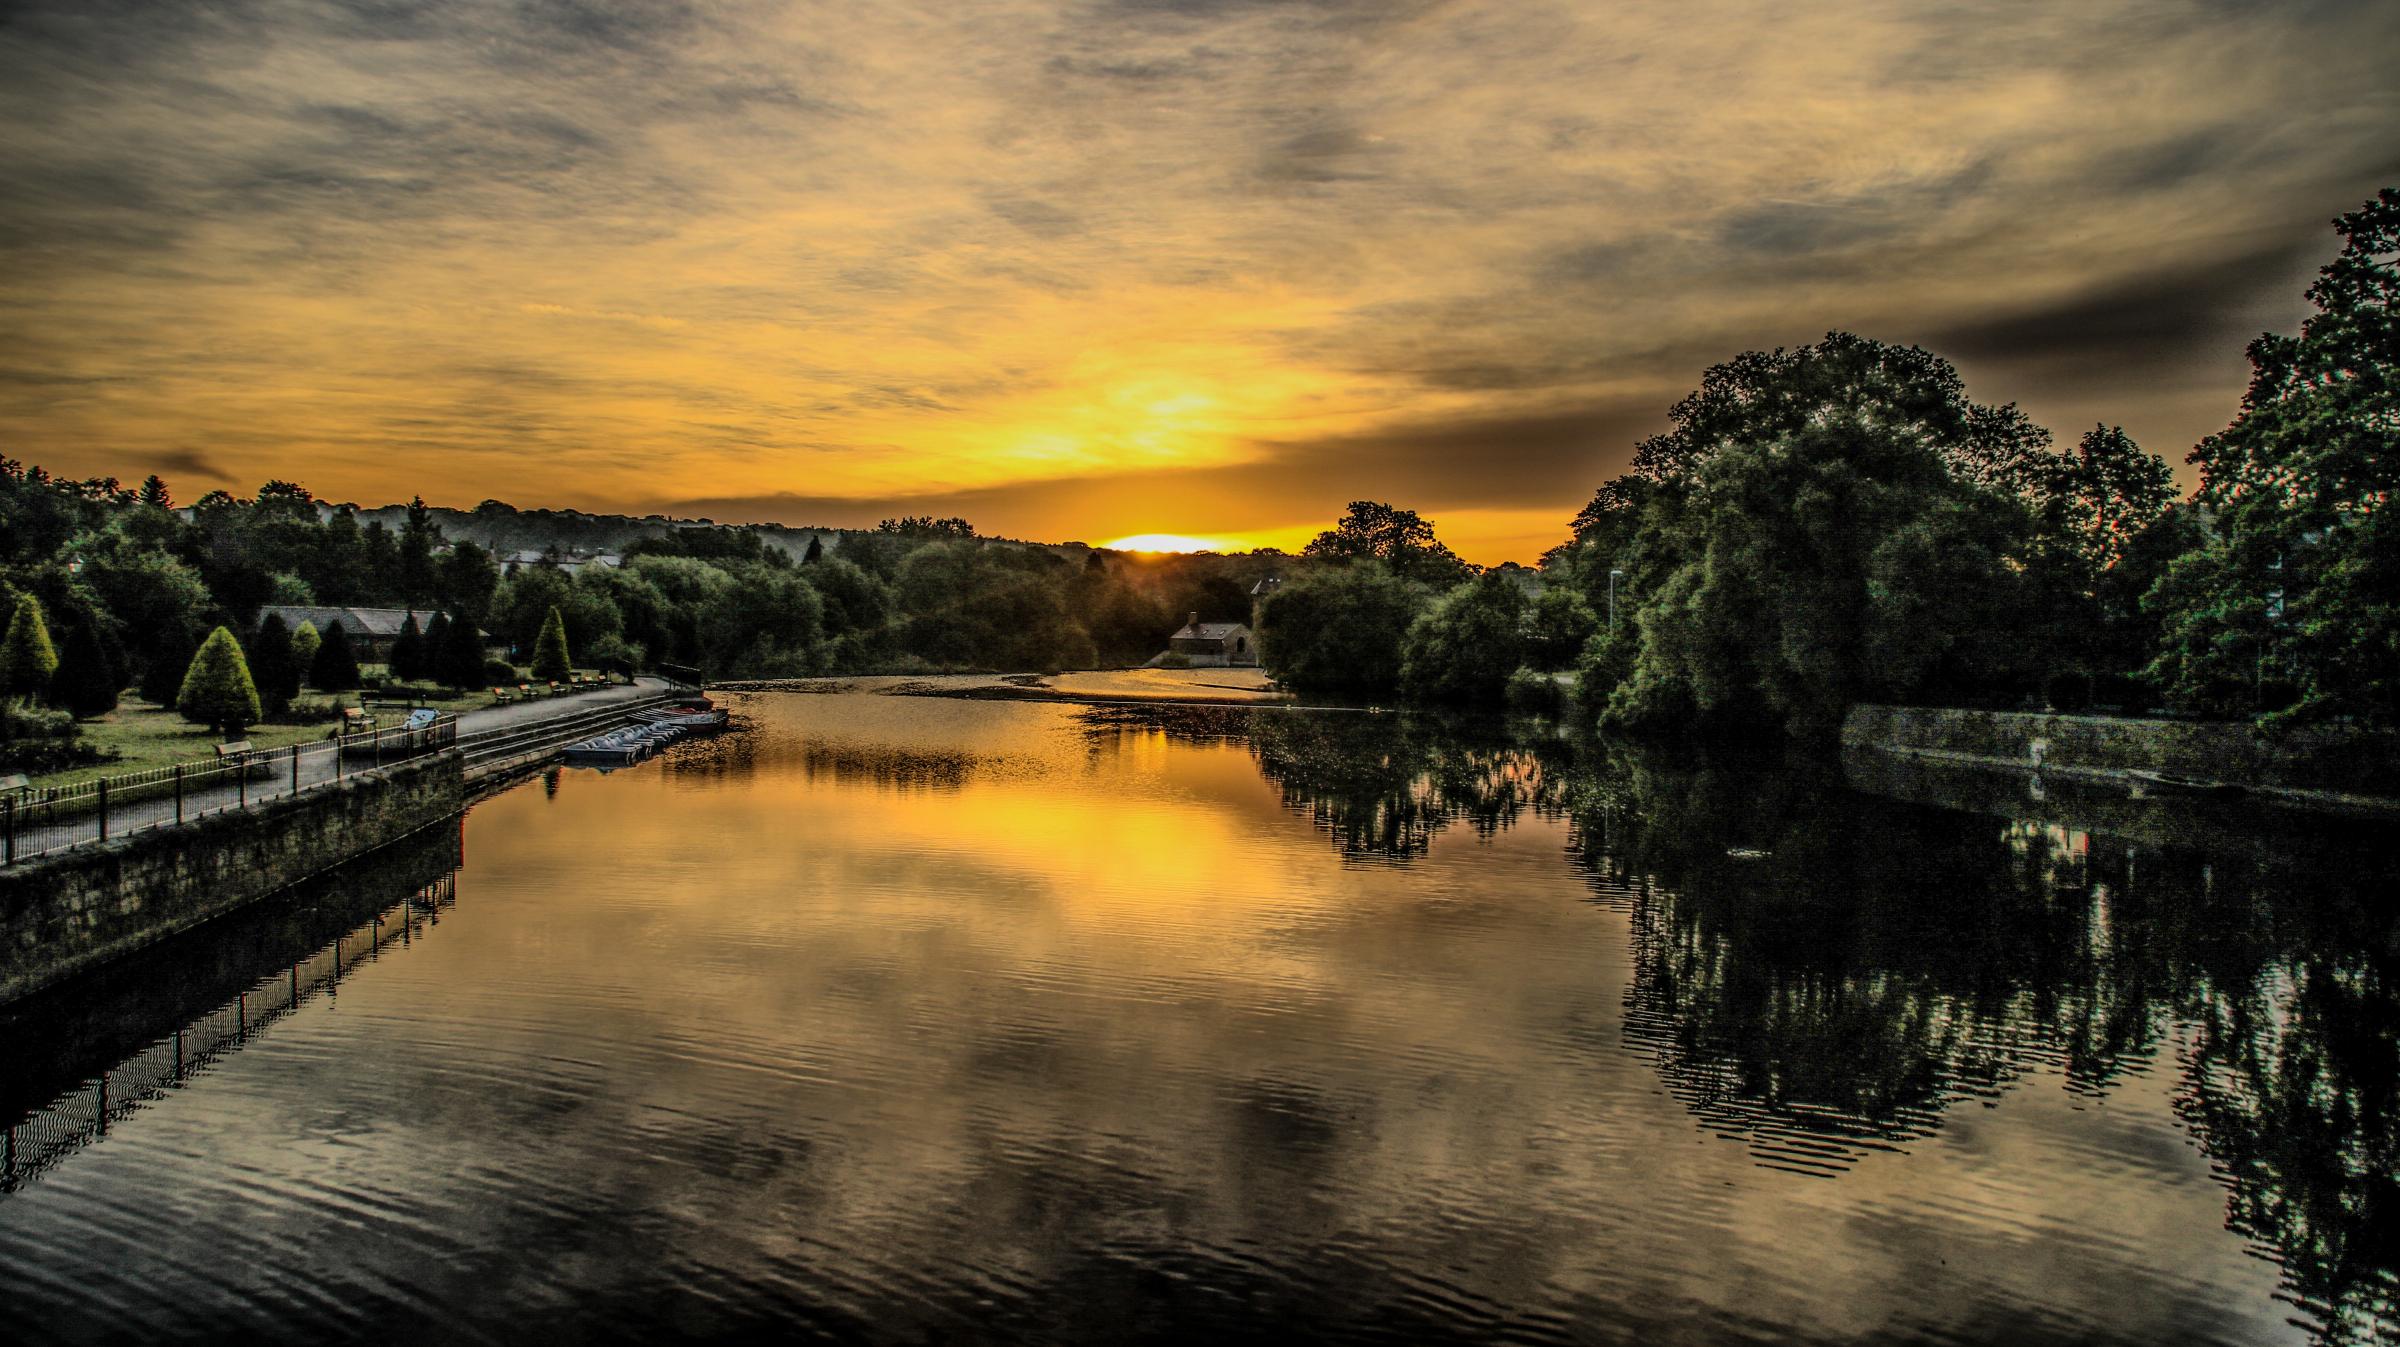 The River Wharfe in Otley at sunrise by Richard Perks